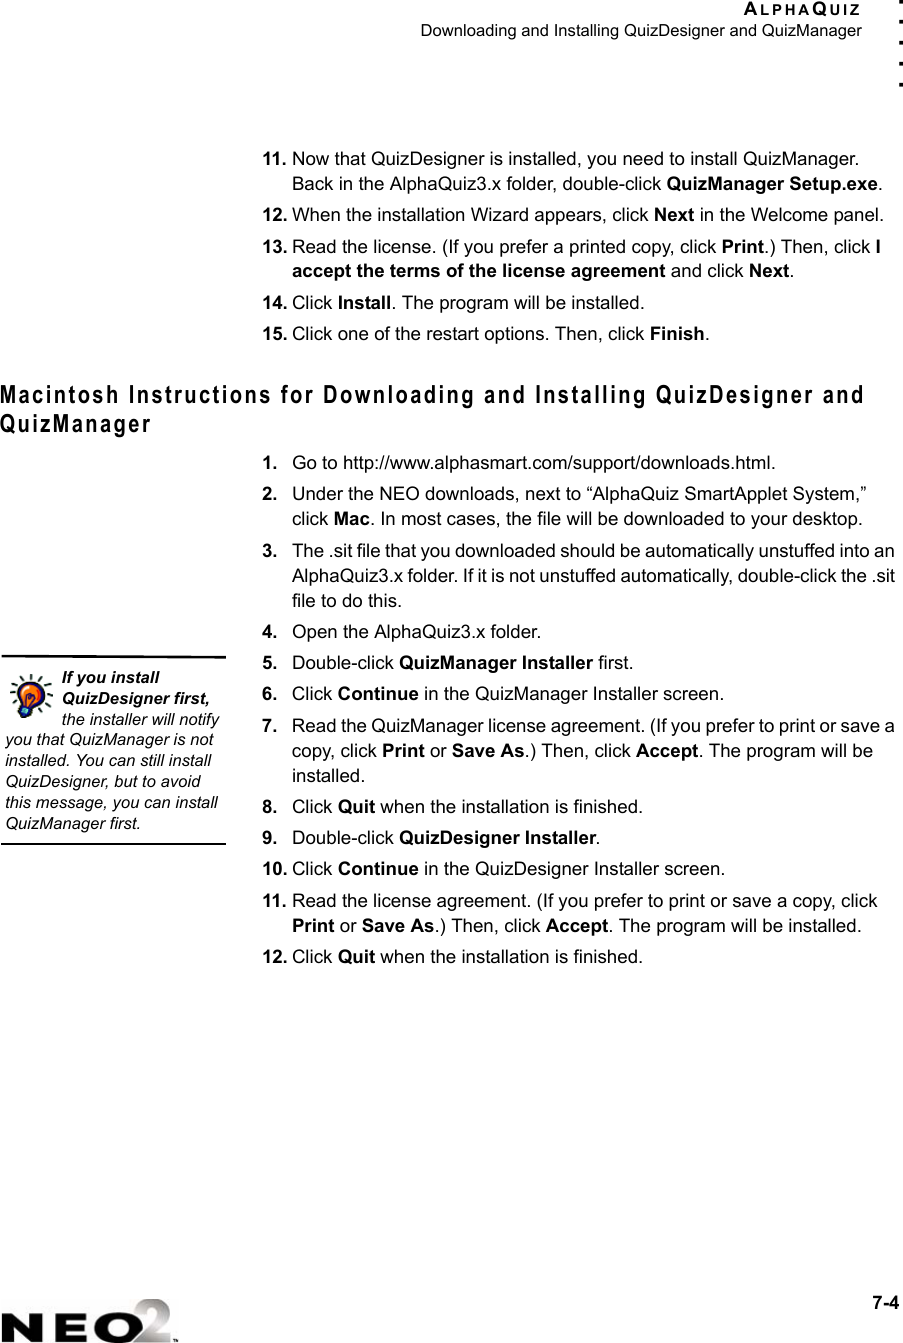 ALPHAQUIZDownloading and Installing QuizDesigner and QuizManager7-4. . . . .11. Now that QuizDesigner is installed, you need to install QuizManager. Back in the AlphaQuiz3.x folder, double-click QuizManager Setup.exe.12. When the installation Wizard appears, click Next in the Welcome panel.13. Read the license. (If you prefer a printed copy, click Print.) Then, click I accept the terms of the license agreement and click Next.14. Click Install. The program will be installed.15. Click one of the restart options. Then, click Finish.Macintosh Instructions for Downloading and Installing QuizDesigner and QuizManager1. Go to http://www.alphasmart.com/support/downloads.html.2. Under the NEO downloads, next to “AlphaQuiz SmartApplet System,” click Mac. In most cases, the file will be downloaded to your desktop.3. The .sit file that you downloaded should be automatically unstuffed into an AlphaQuiz3.x folder. If it is not unstuffed automatically, double-click the .sit file to do this.4. Open the AlphaQuiz3.x folder.5. Double-click QuizManager Installer first.6. Click Continue in the QuizManager Installer screen.7. Read the QuizManager license agreement. (If you prefer to print or save a copy, click Print or Save As.) Then, click Accept. The program will be installed.8. Click Quit when the installation is finished.9. Double-click QuizDesigner Installer.10. Click Continue in the QuizDesigner Installer screen.11. Read the license agreement. (If you prefer to print or save a copy, click Print or Save As.) Then, click Accept. The program will be installed.12. Click Quit when the installation is finished.If you install QuizDesigner first, the installer will notify you that QuizManager is not installed. You can still install QuizDesigner, but to avoid this message, you can install QuizManager first.